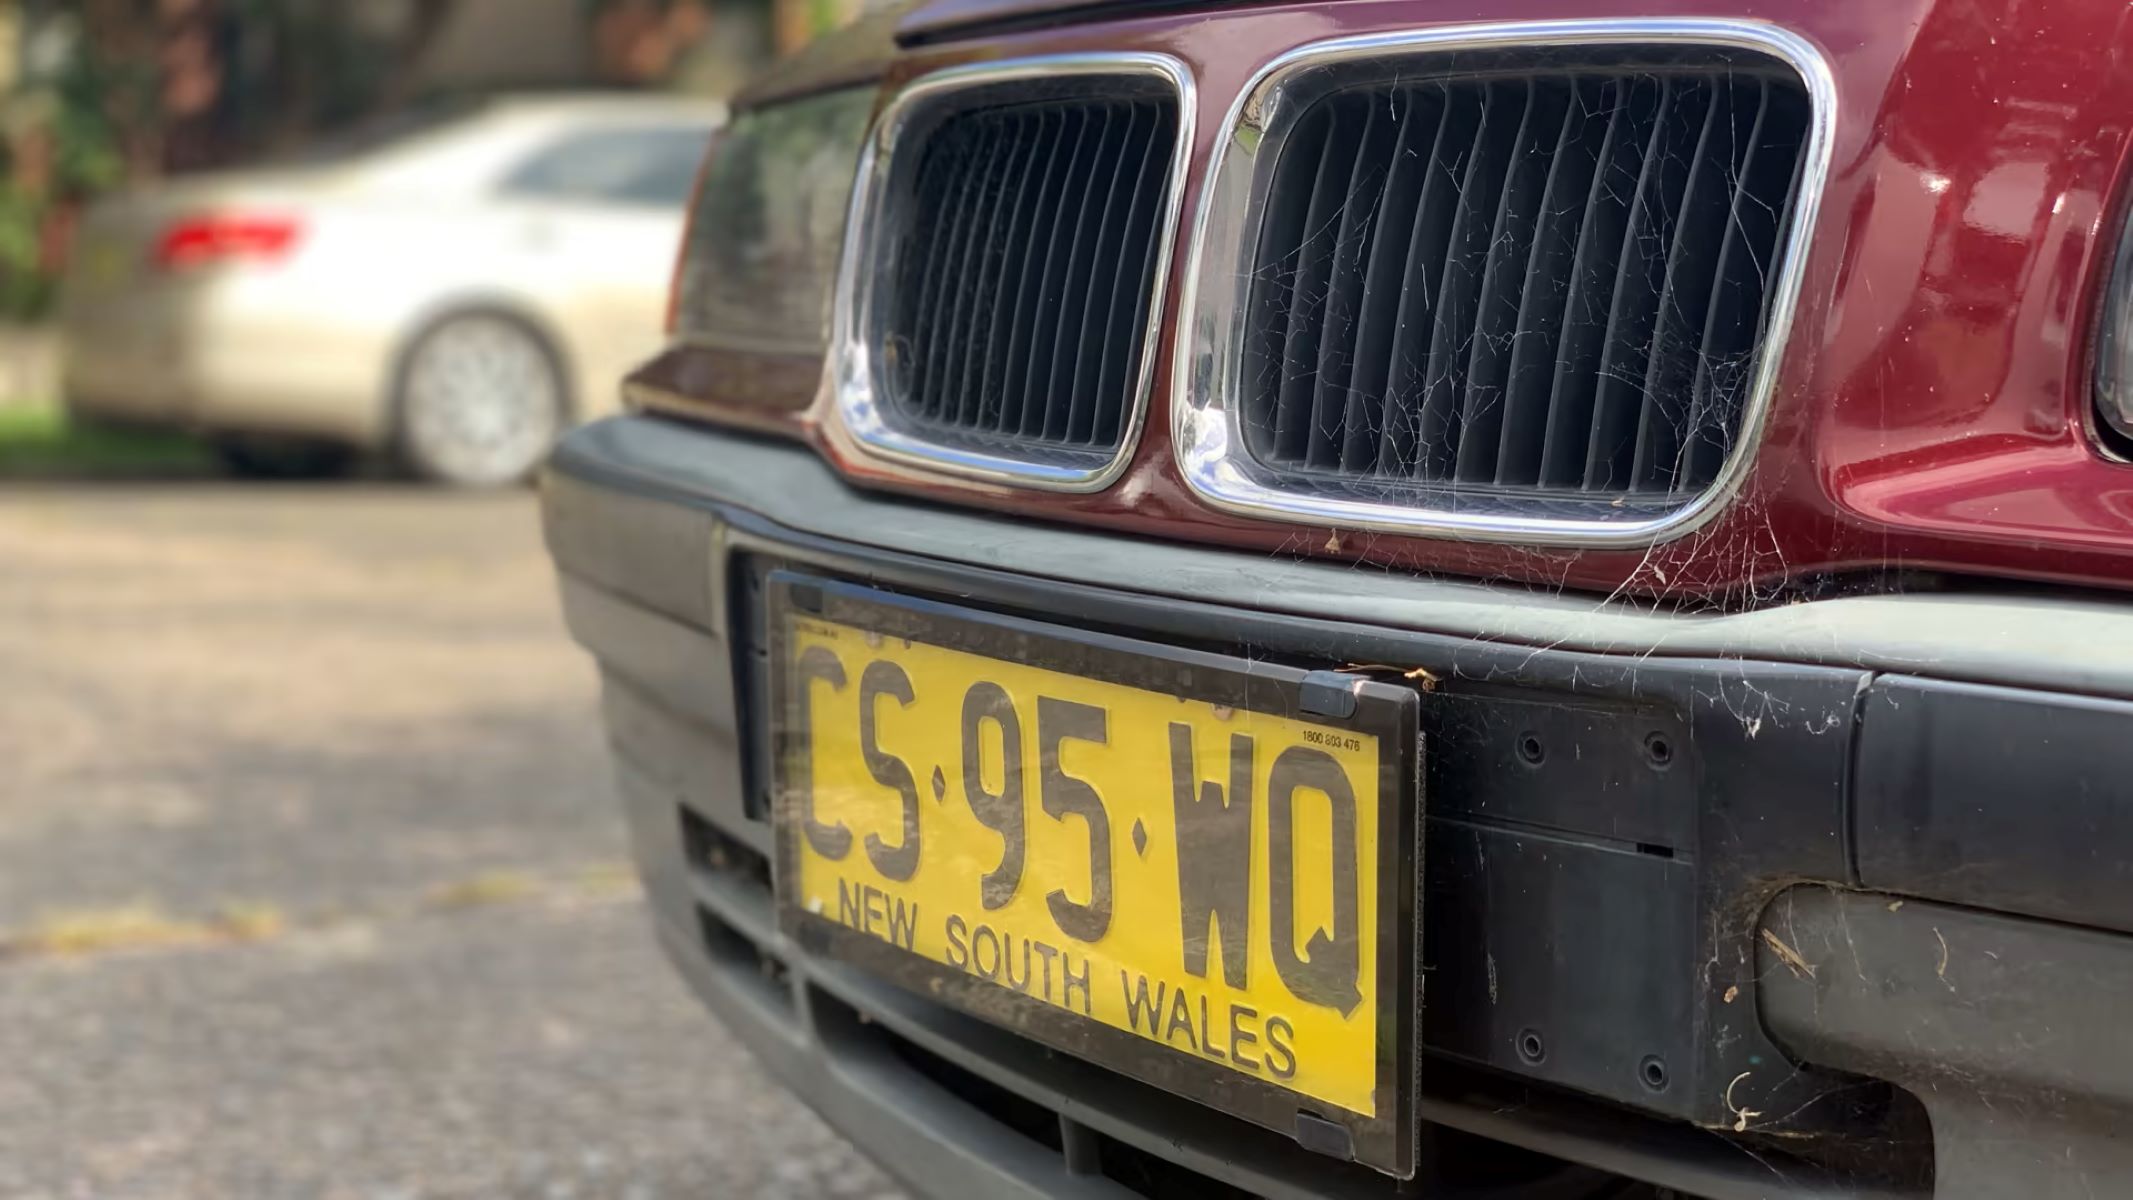 The Reasons Behind Cold-Plating Cars With Mismatched License Plates